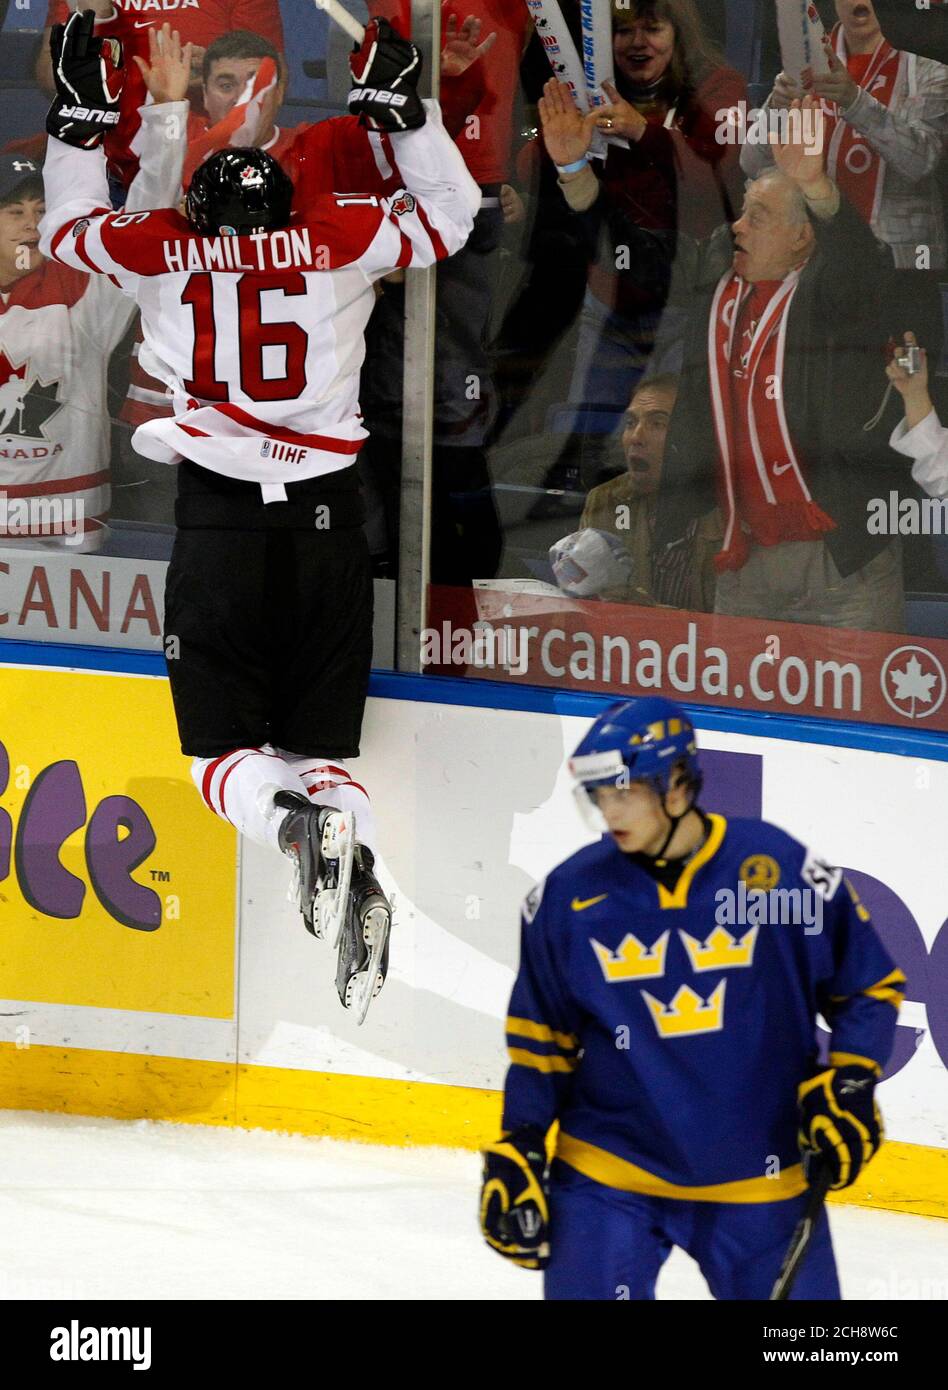 Canada S Curtis Hamilton L Jumps Into The Glass After Scoring As Sweden S Adam Larsson Skates Away During The First Period Of Their Iihf World Junior Championships Game In Buffalo New York December